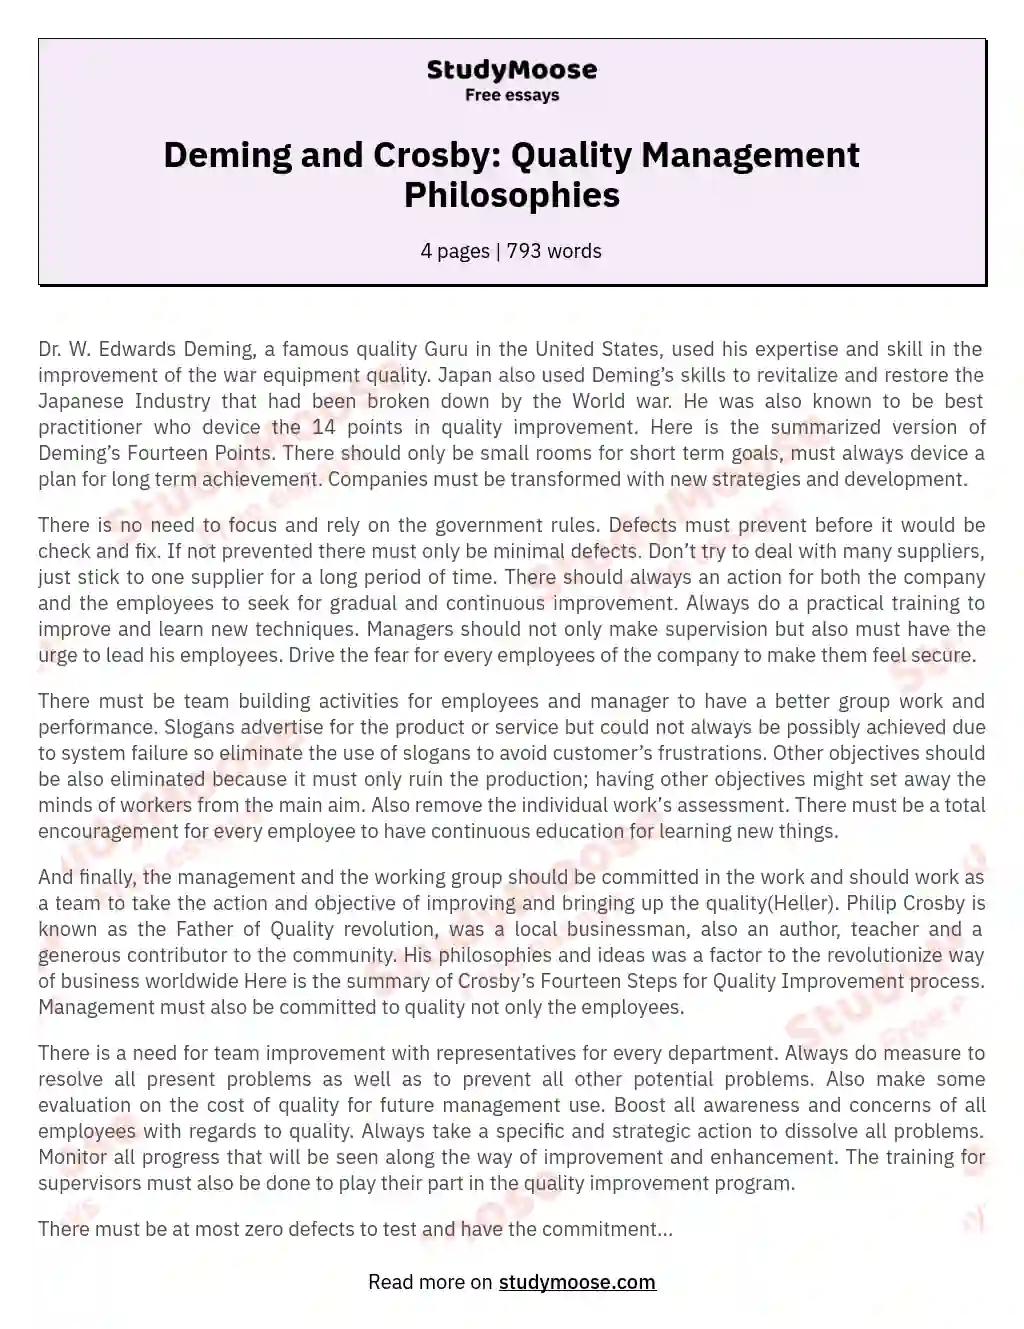 Deming and Crosby: Quality Management Philosophies essay